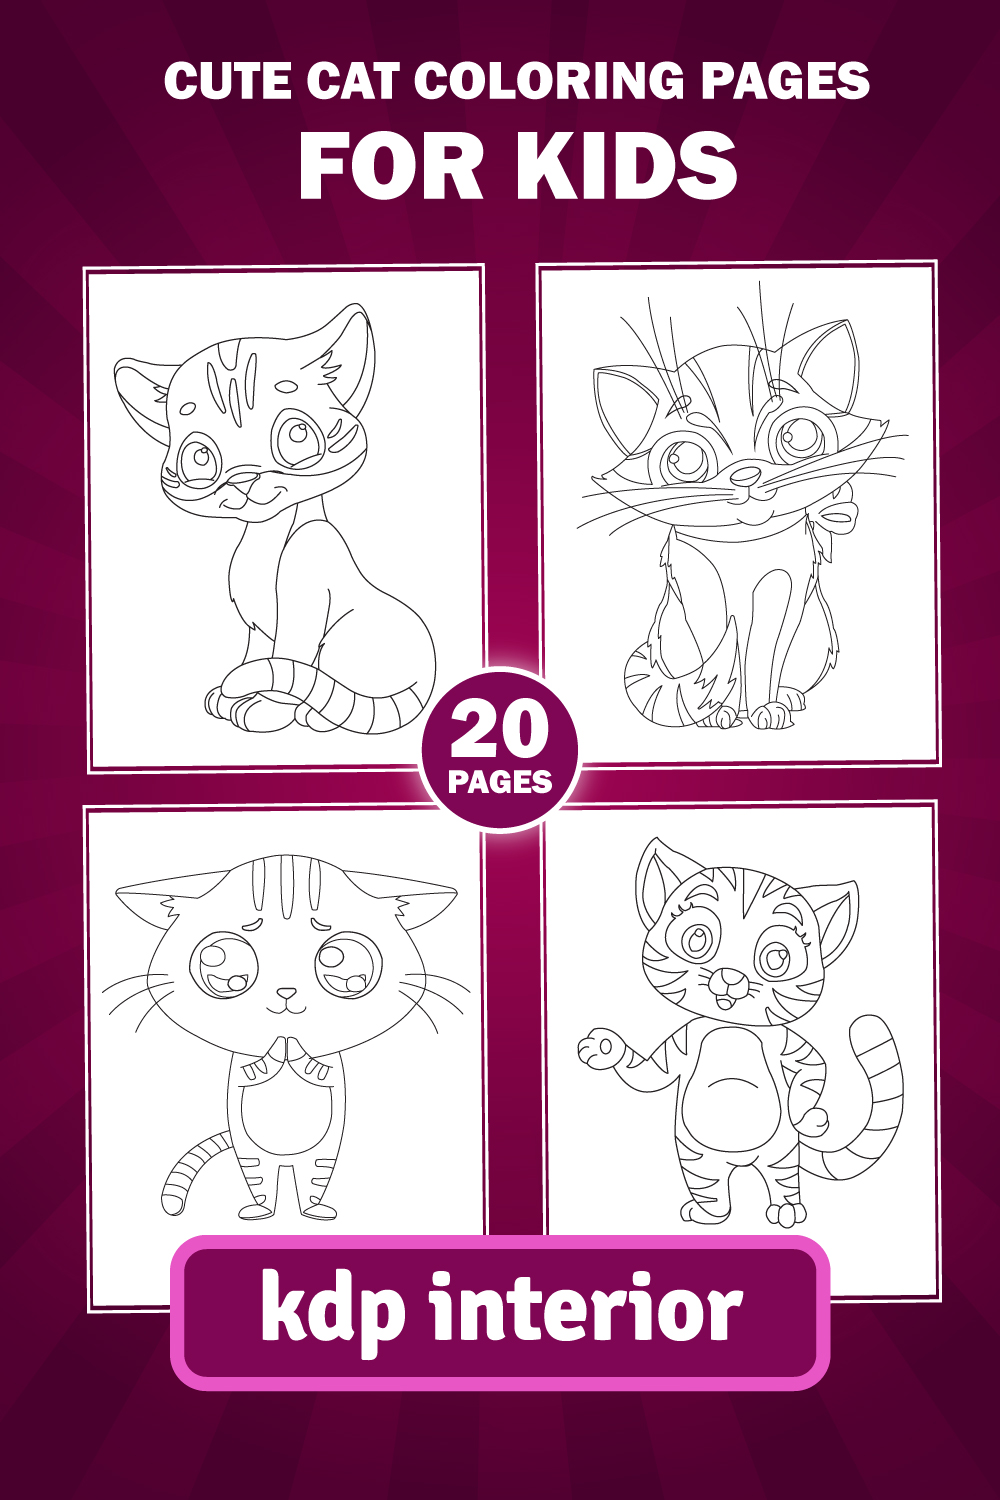 Cute Cat Coloring Pages KDP Interior pinterest image.